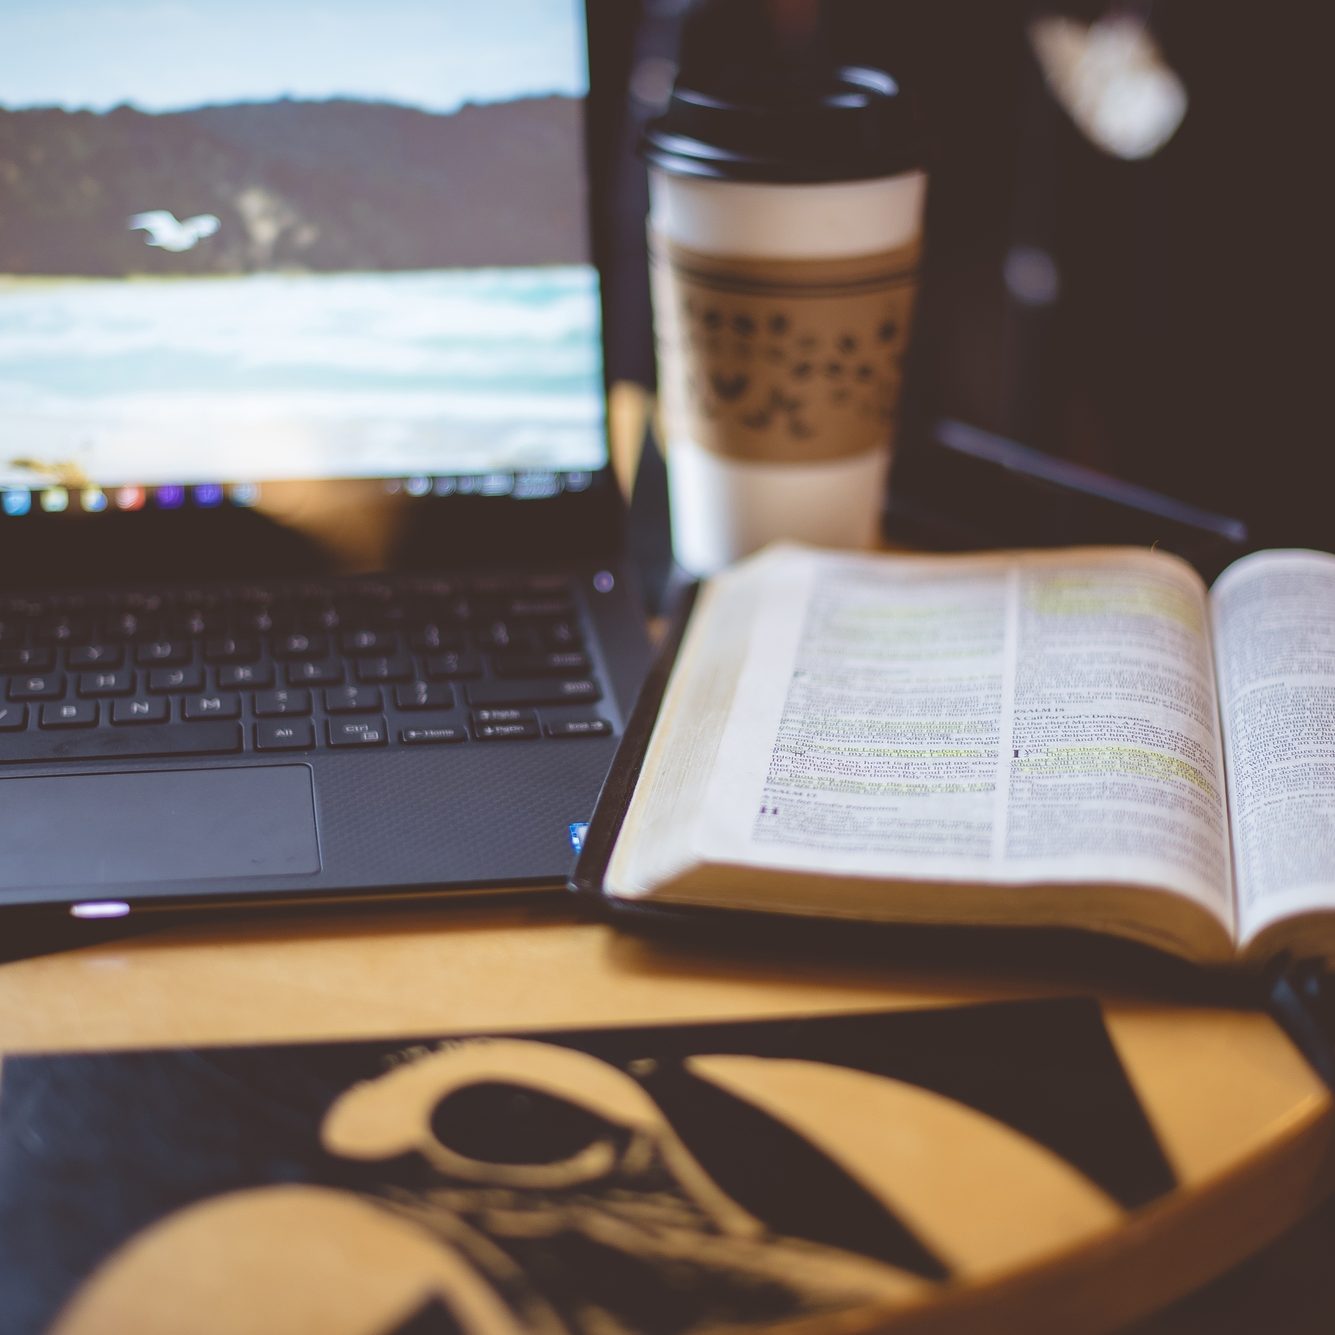 A selective focus shot of an open bible near a laptop and coffee on the table with a blurred background